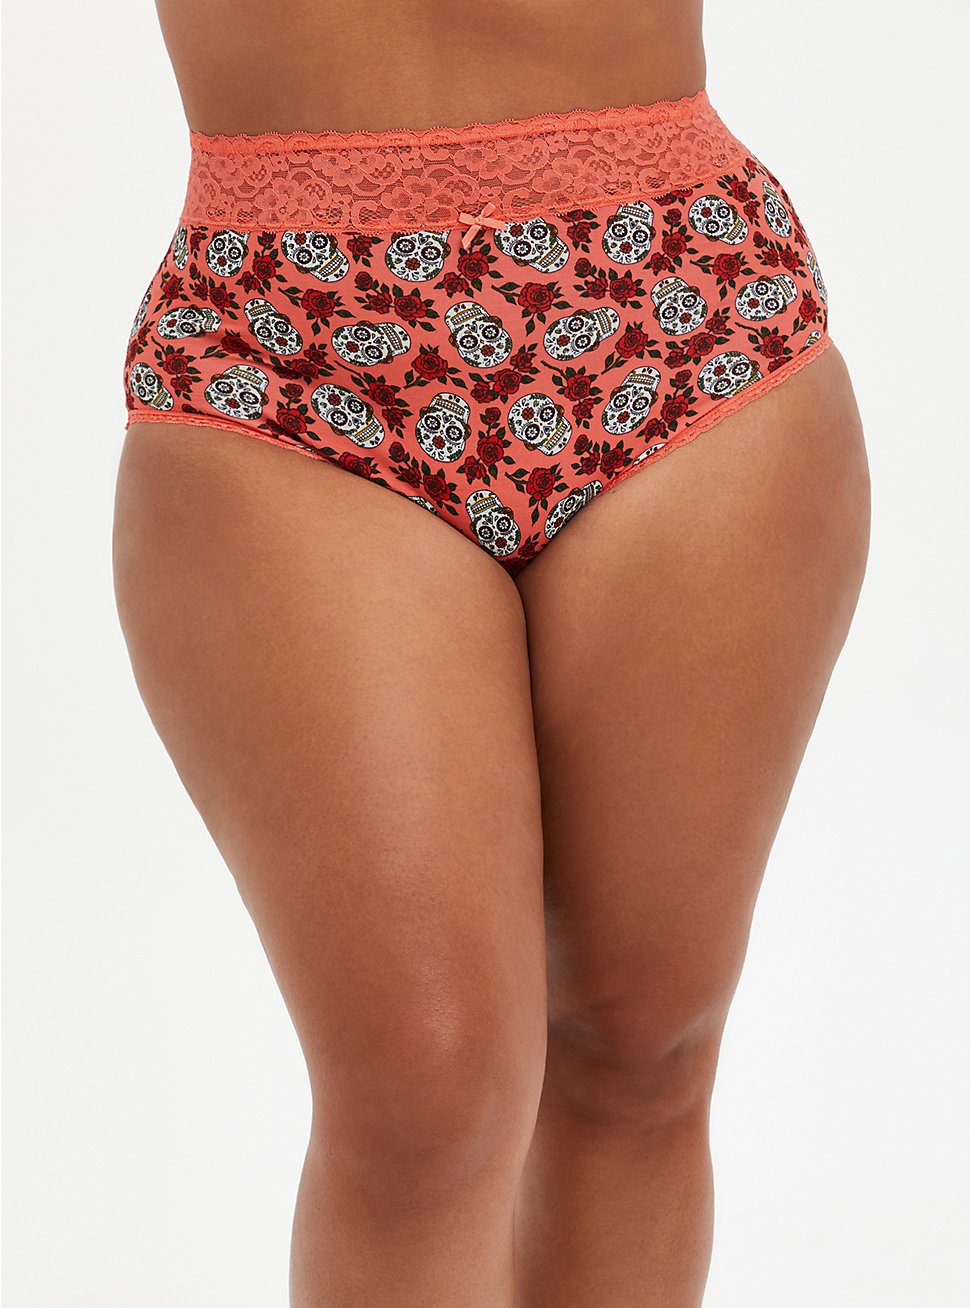 Plus Size Coral Skull Floral Wide Lace Cotton High Waist Panty, DITSY MUERTOS CORAL, hi-res